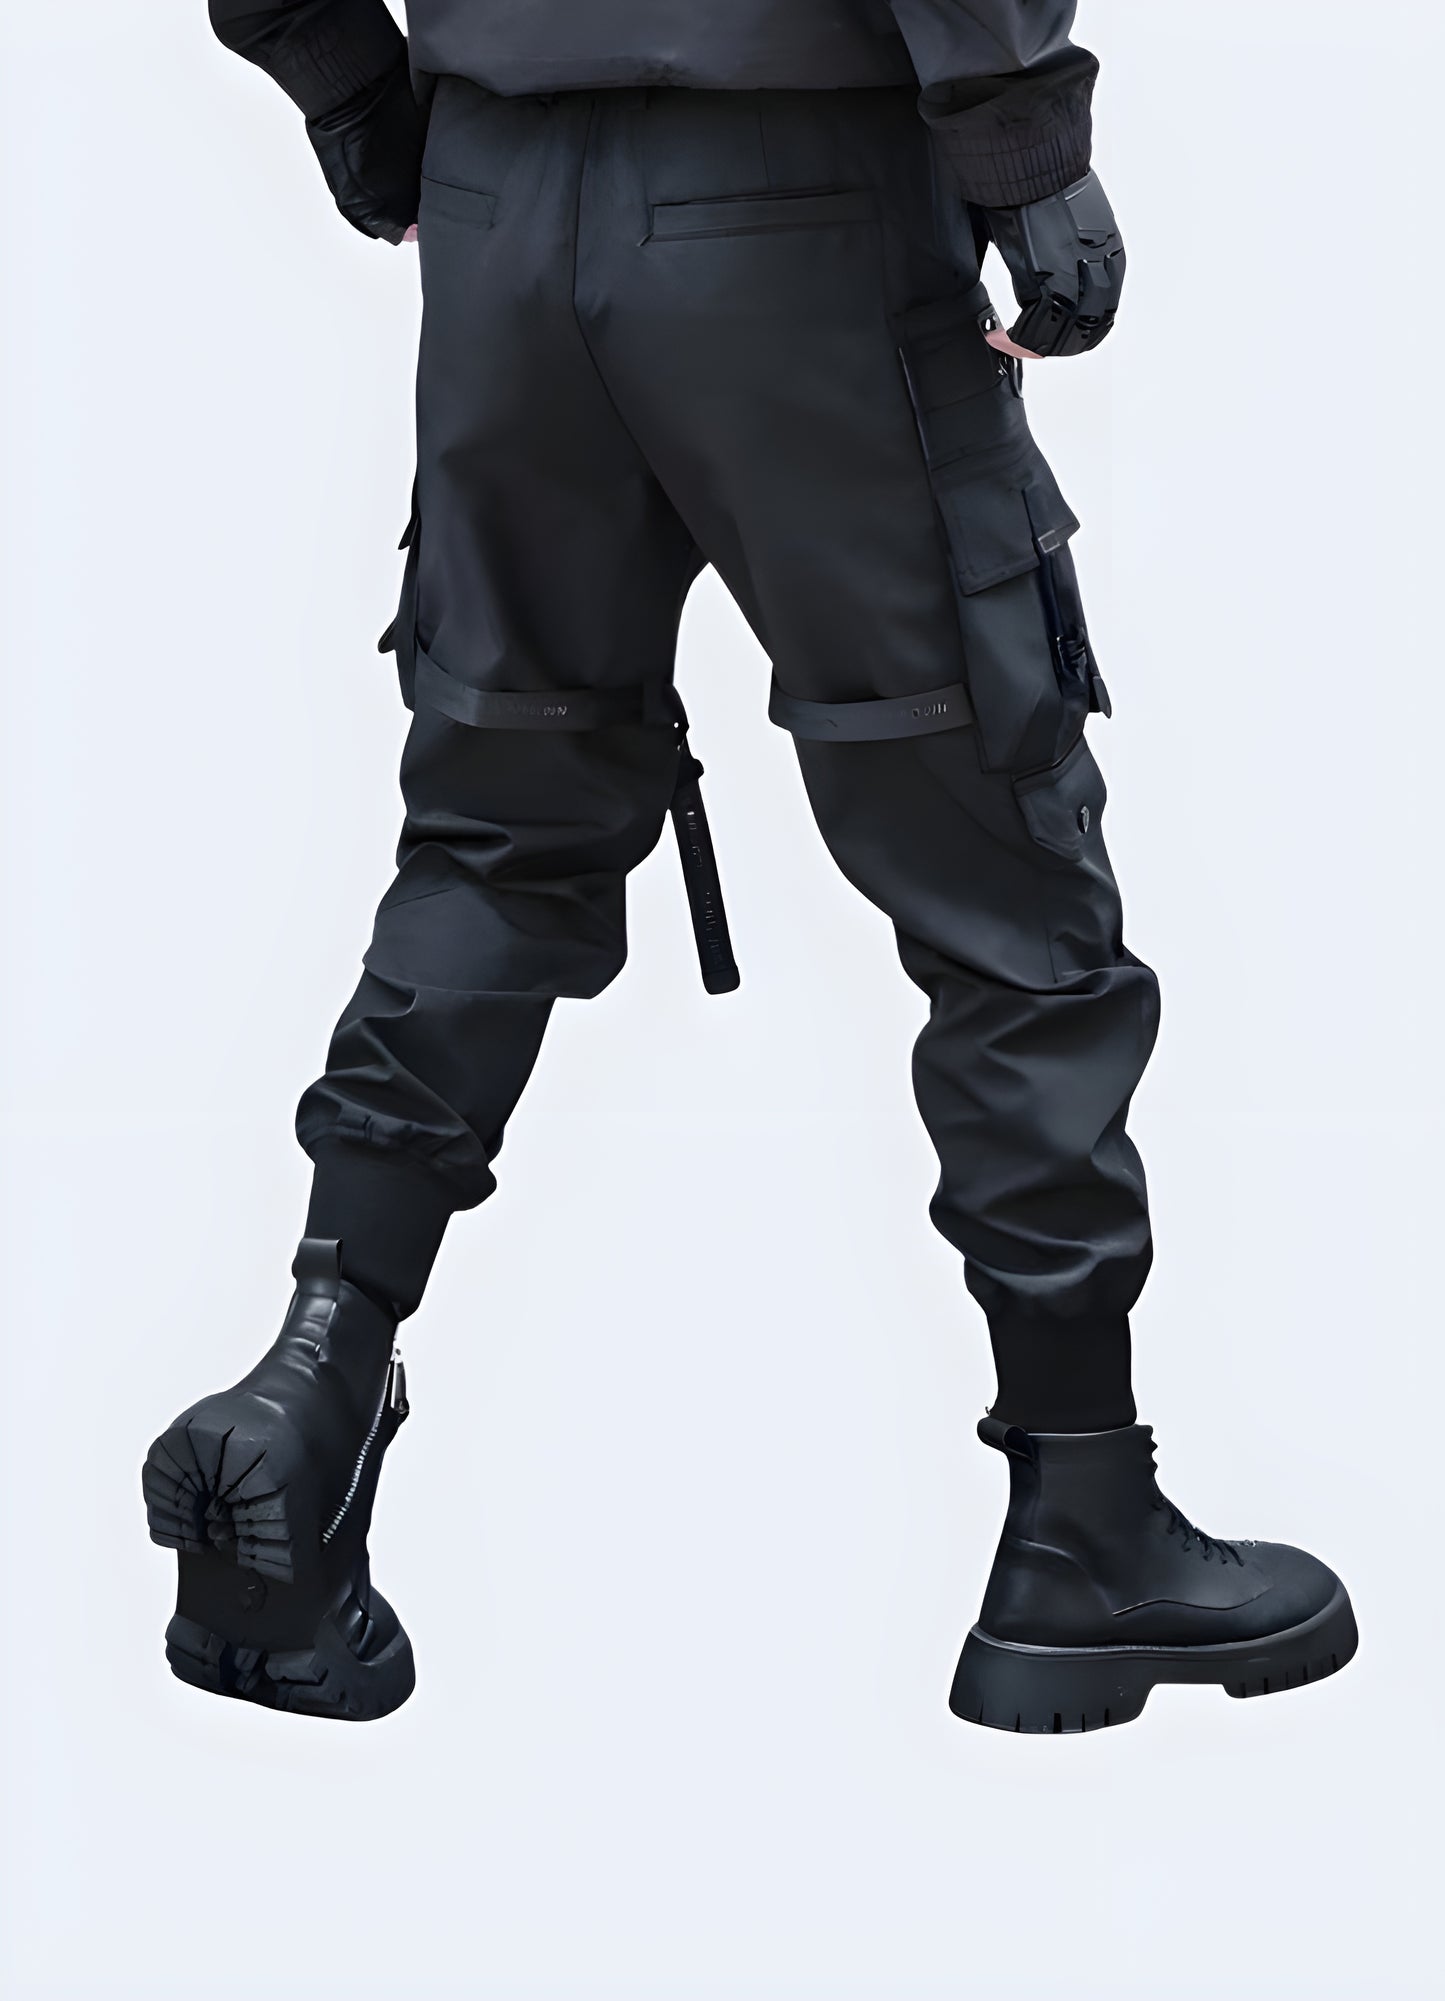 Pockets with excellent storage space cargo pants techwear.